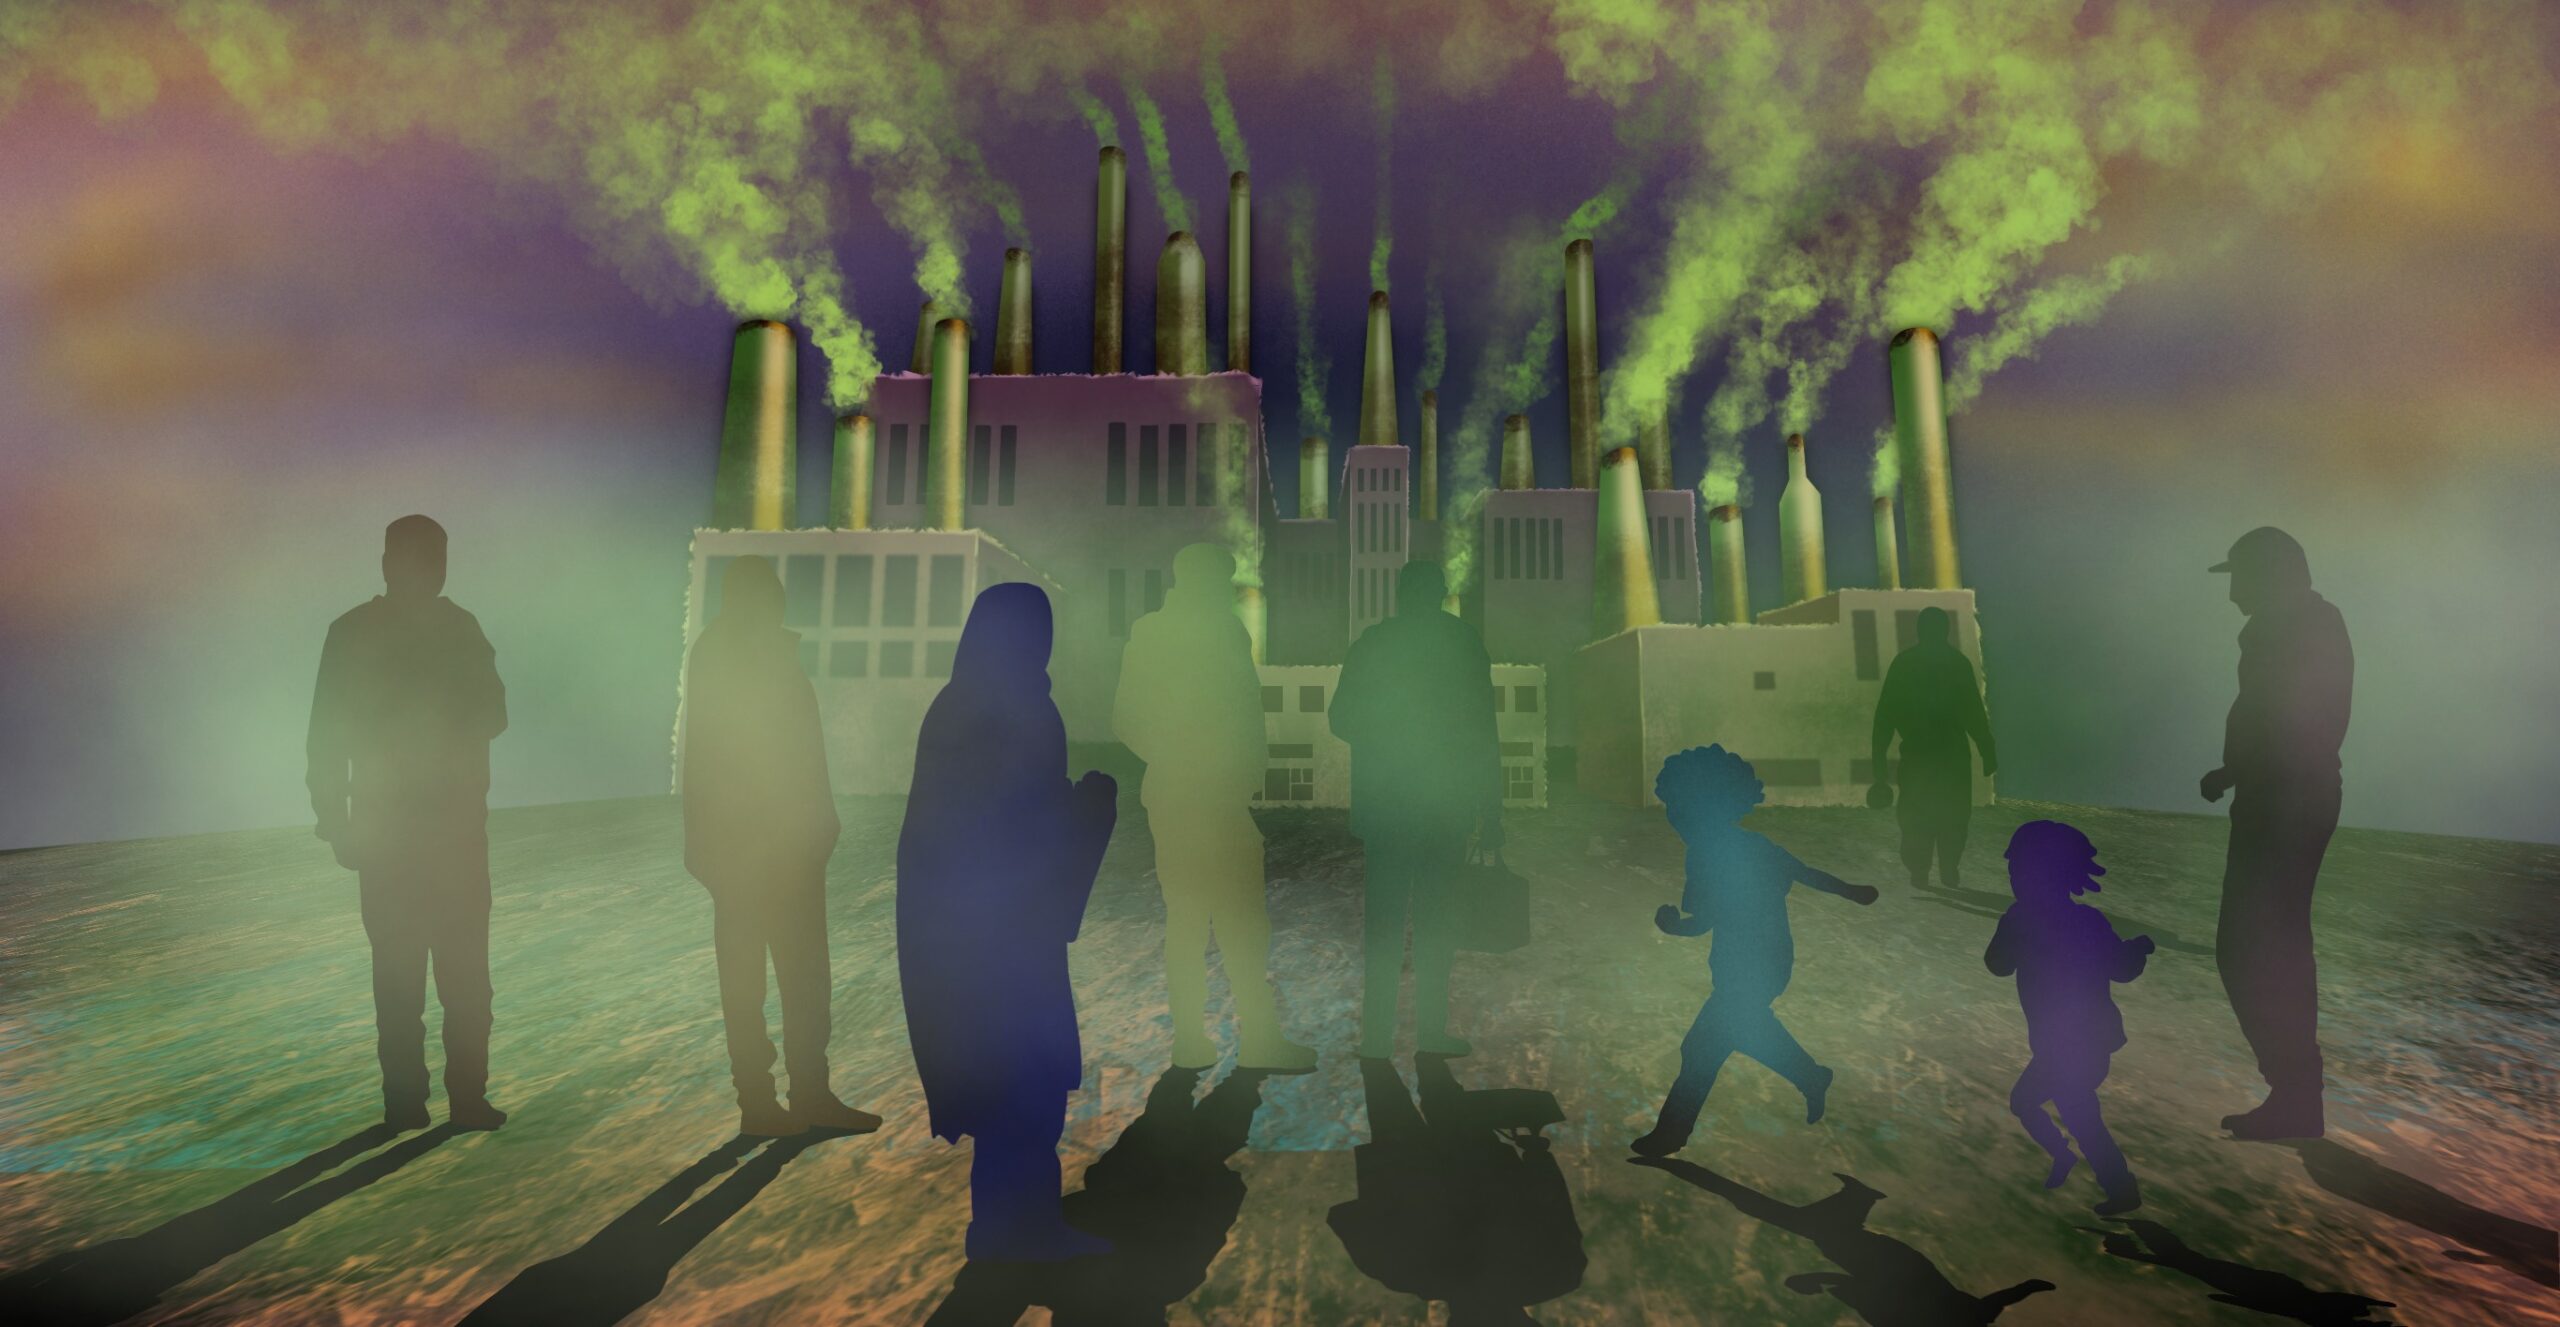 The image shows a foggy scene with silhouettes of adults and kids walking. Behind them in the distance is a factory emitting smoke and fog to depict poison.